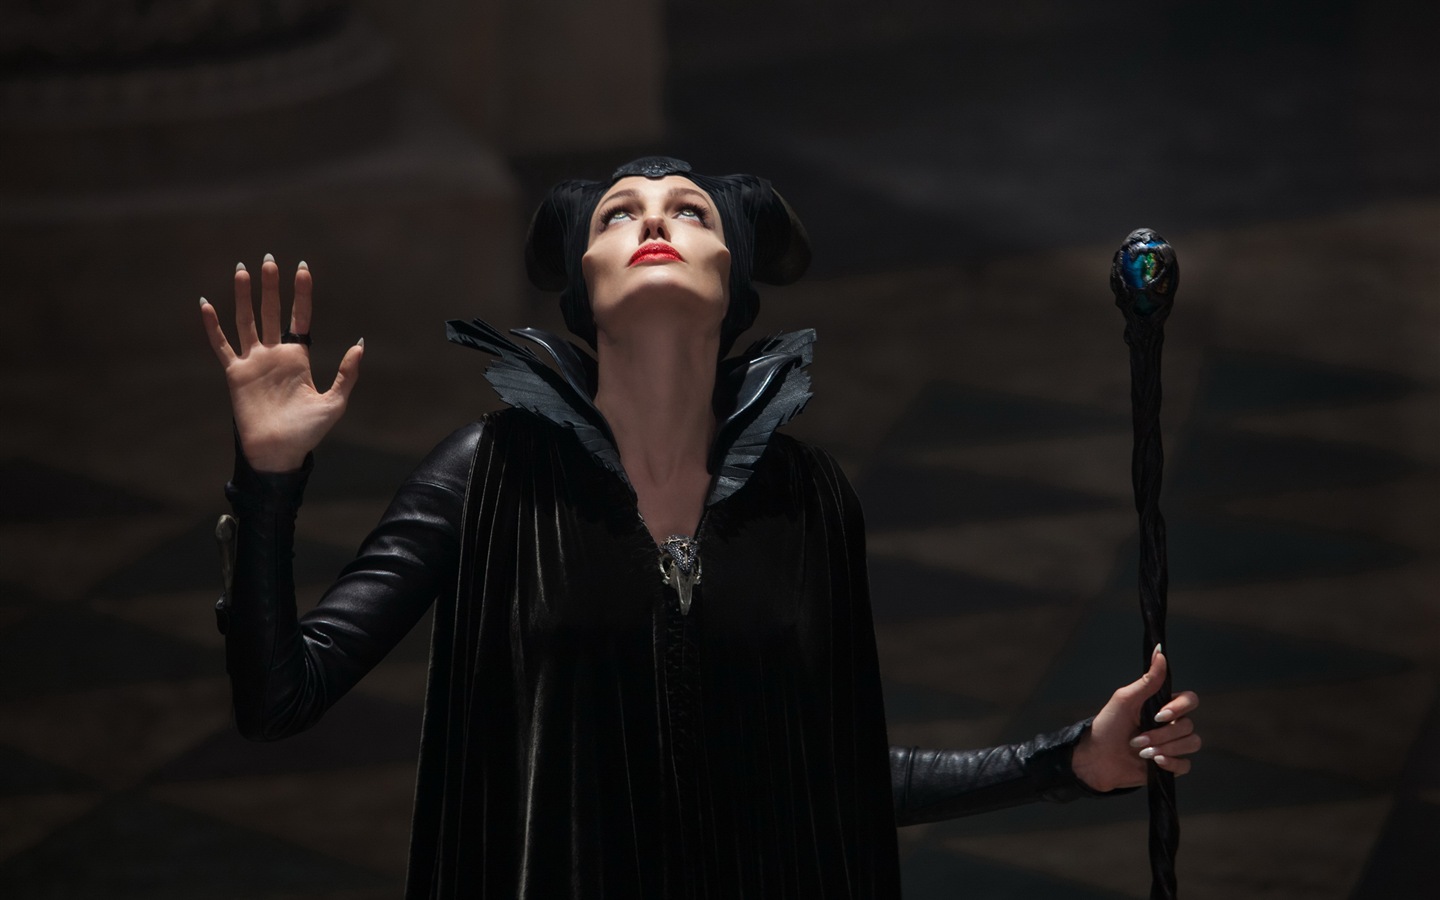 Maleficent 2014 HD movie wallpapers #4 - 1440x900